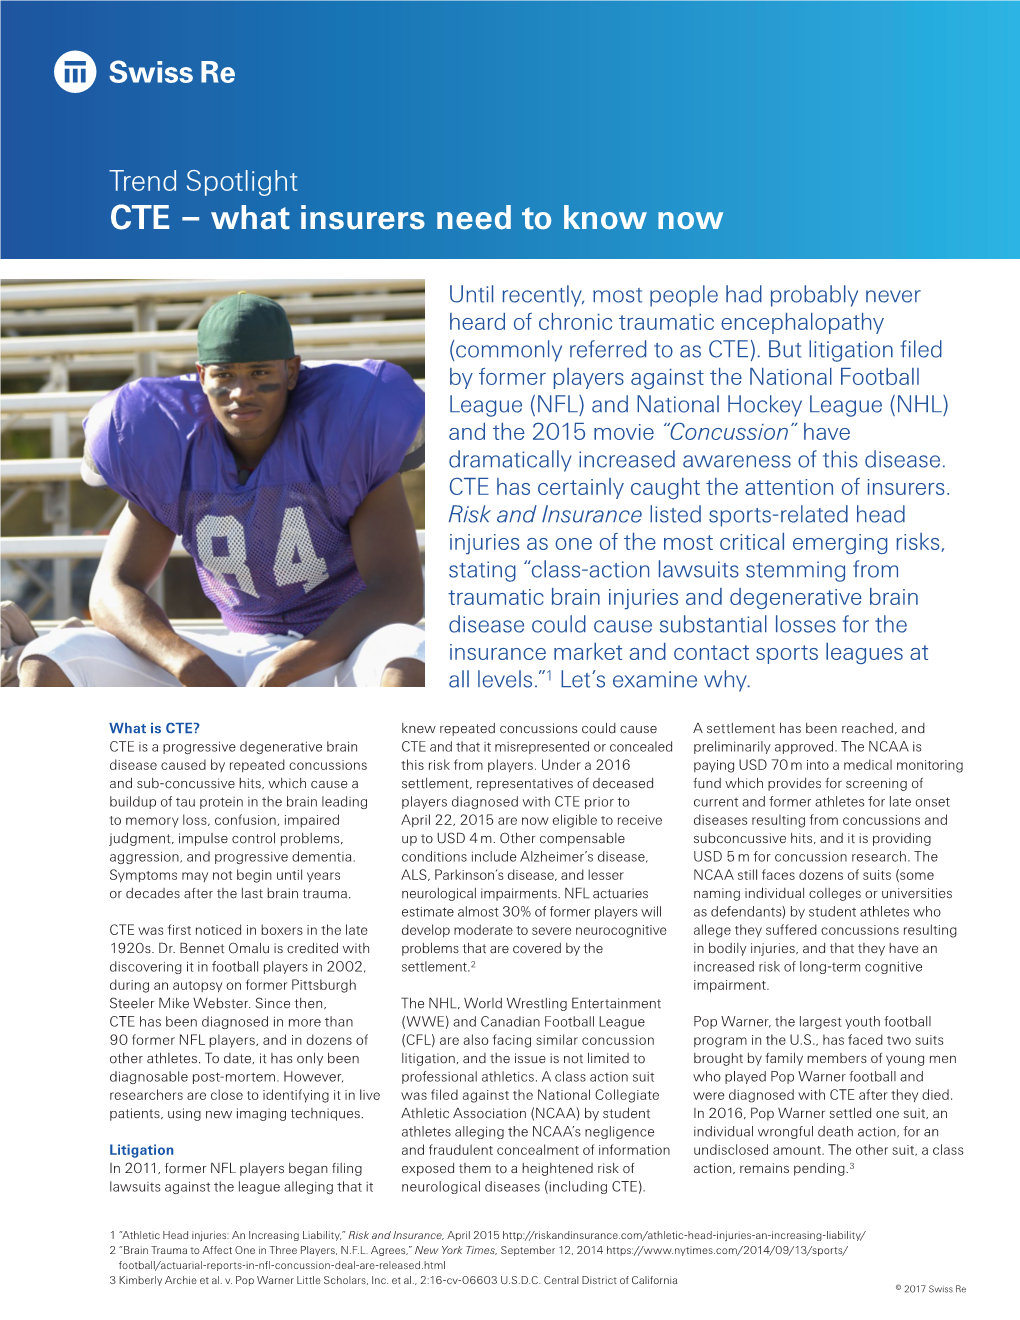 CTE – What Insurers Need to Know Now